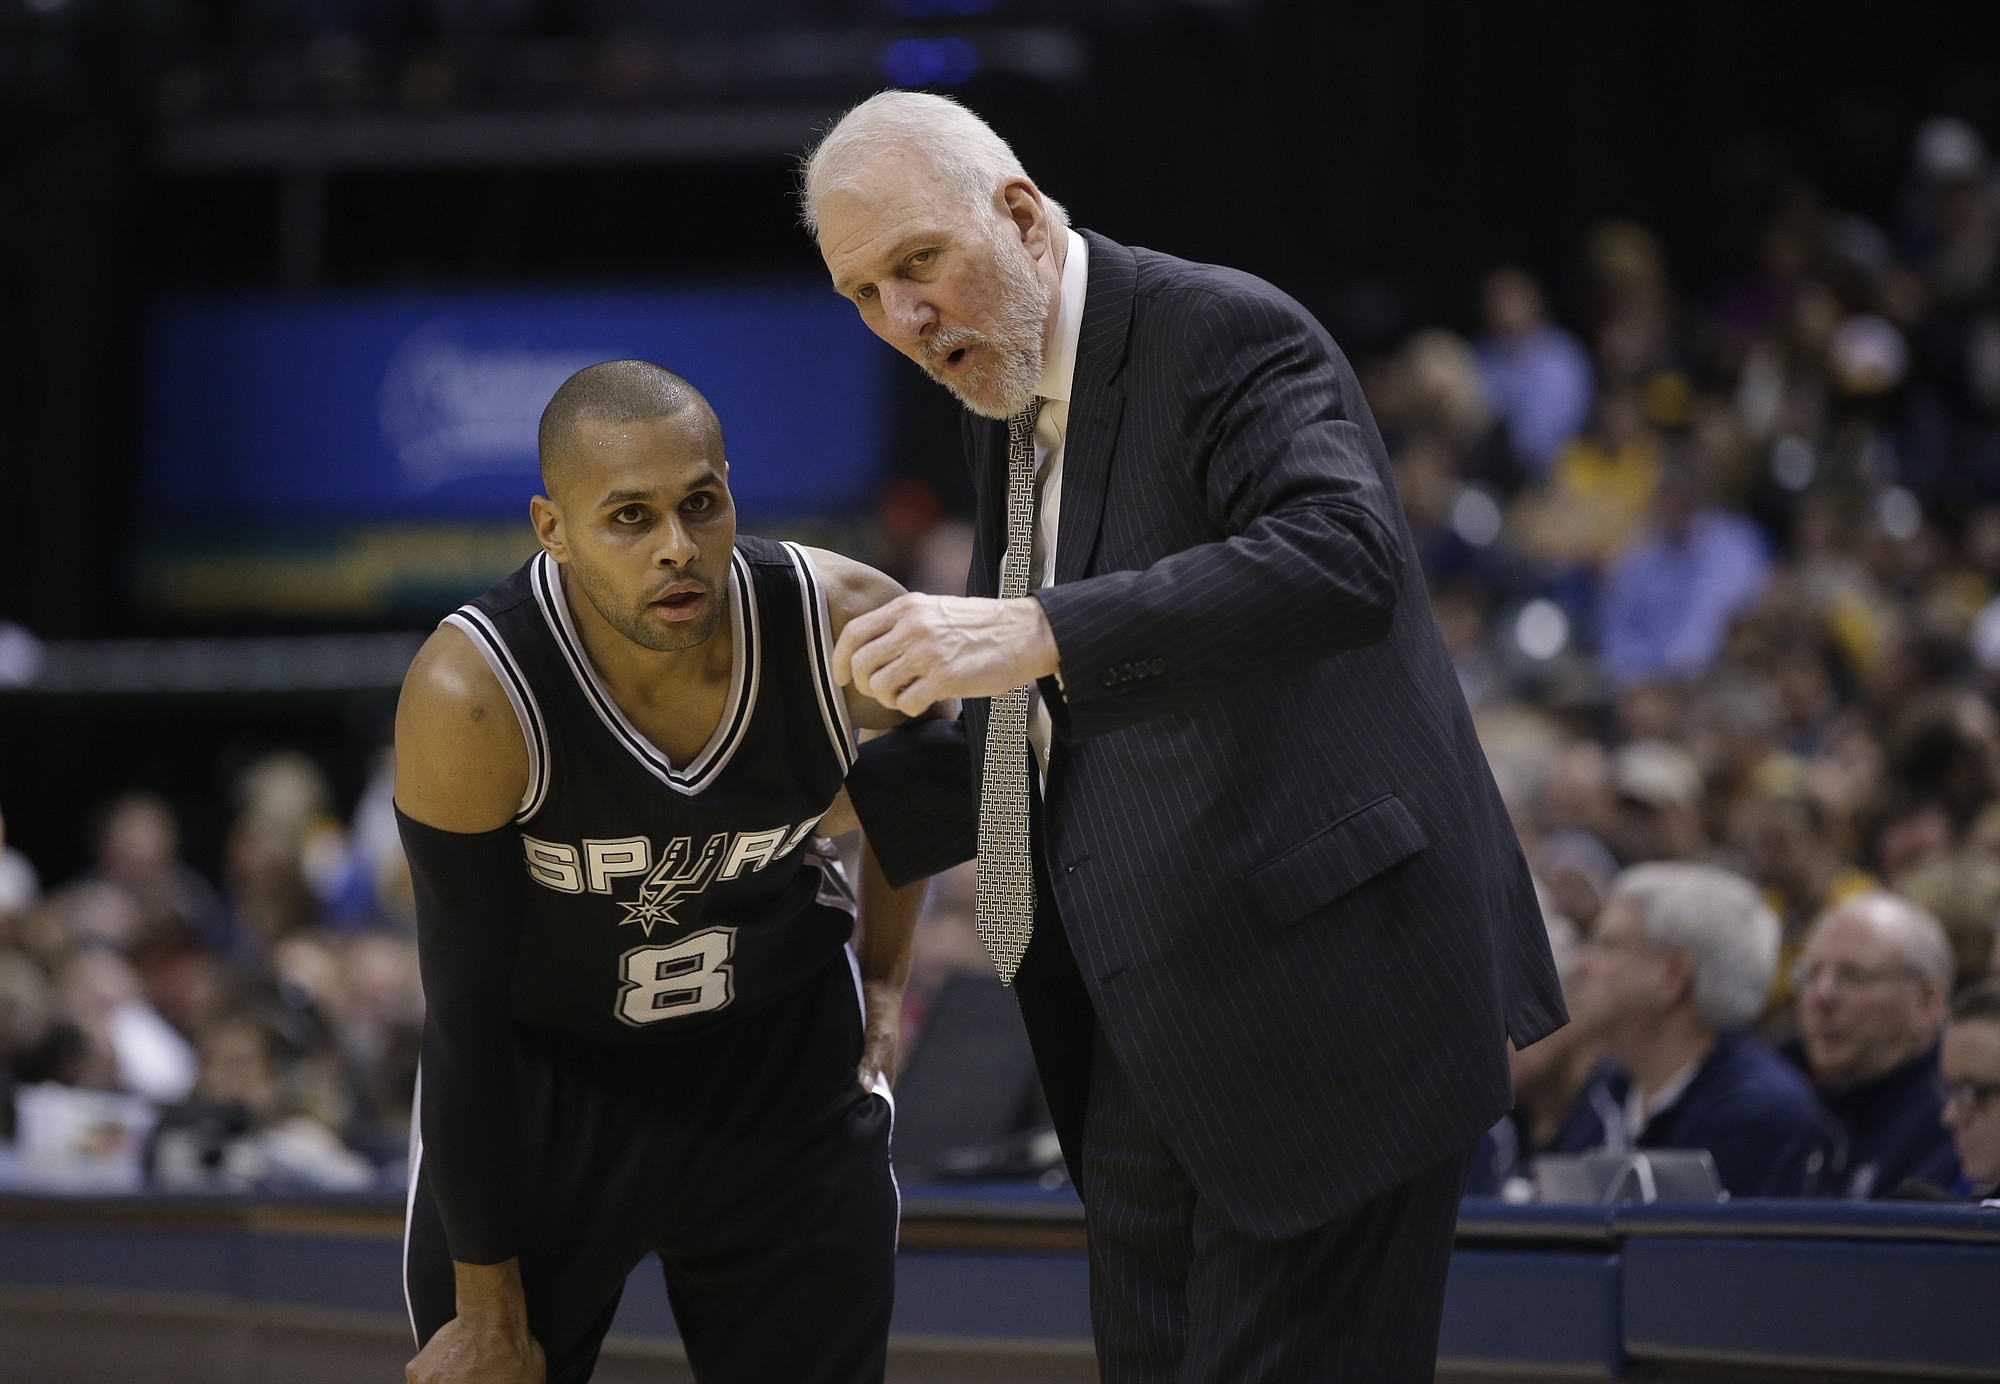 San Antonio Spurs head coach Gregg Popovich talks with Patty Mills (8) during the second half against the Indiana Pacers on Monday, Feb. 9, 2015, in Indianapolis. San Antonio won the game 95-93. The win gave Popovich his 1,000th career win.